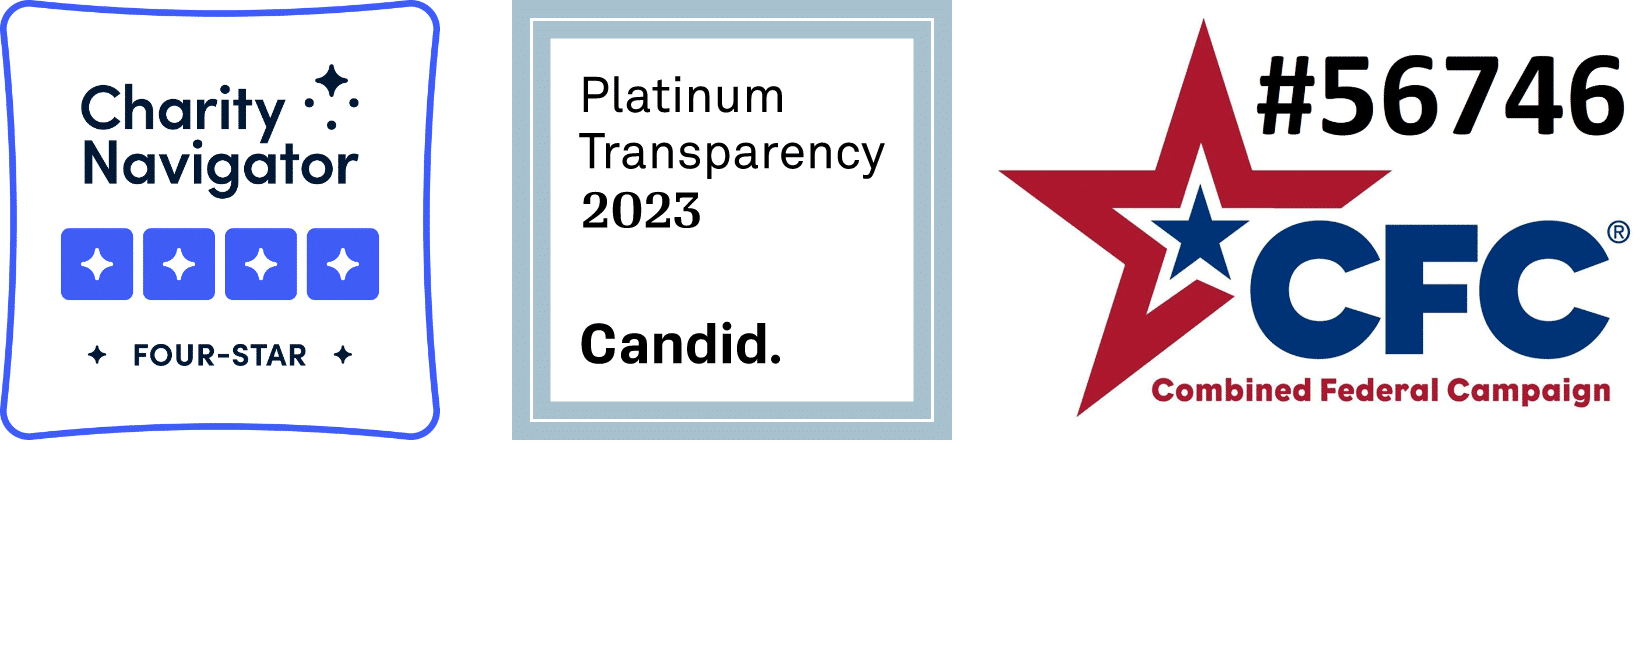 Seals and Logos showing: 4 Star Rating from Charity Navigator, Platinum Seal from Candid, and participation in the Combined Federal Campaign 